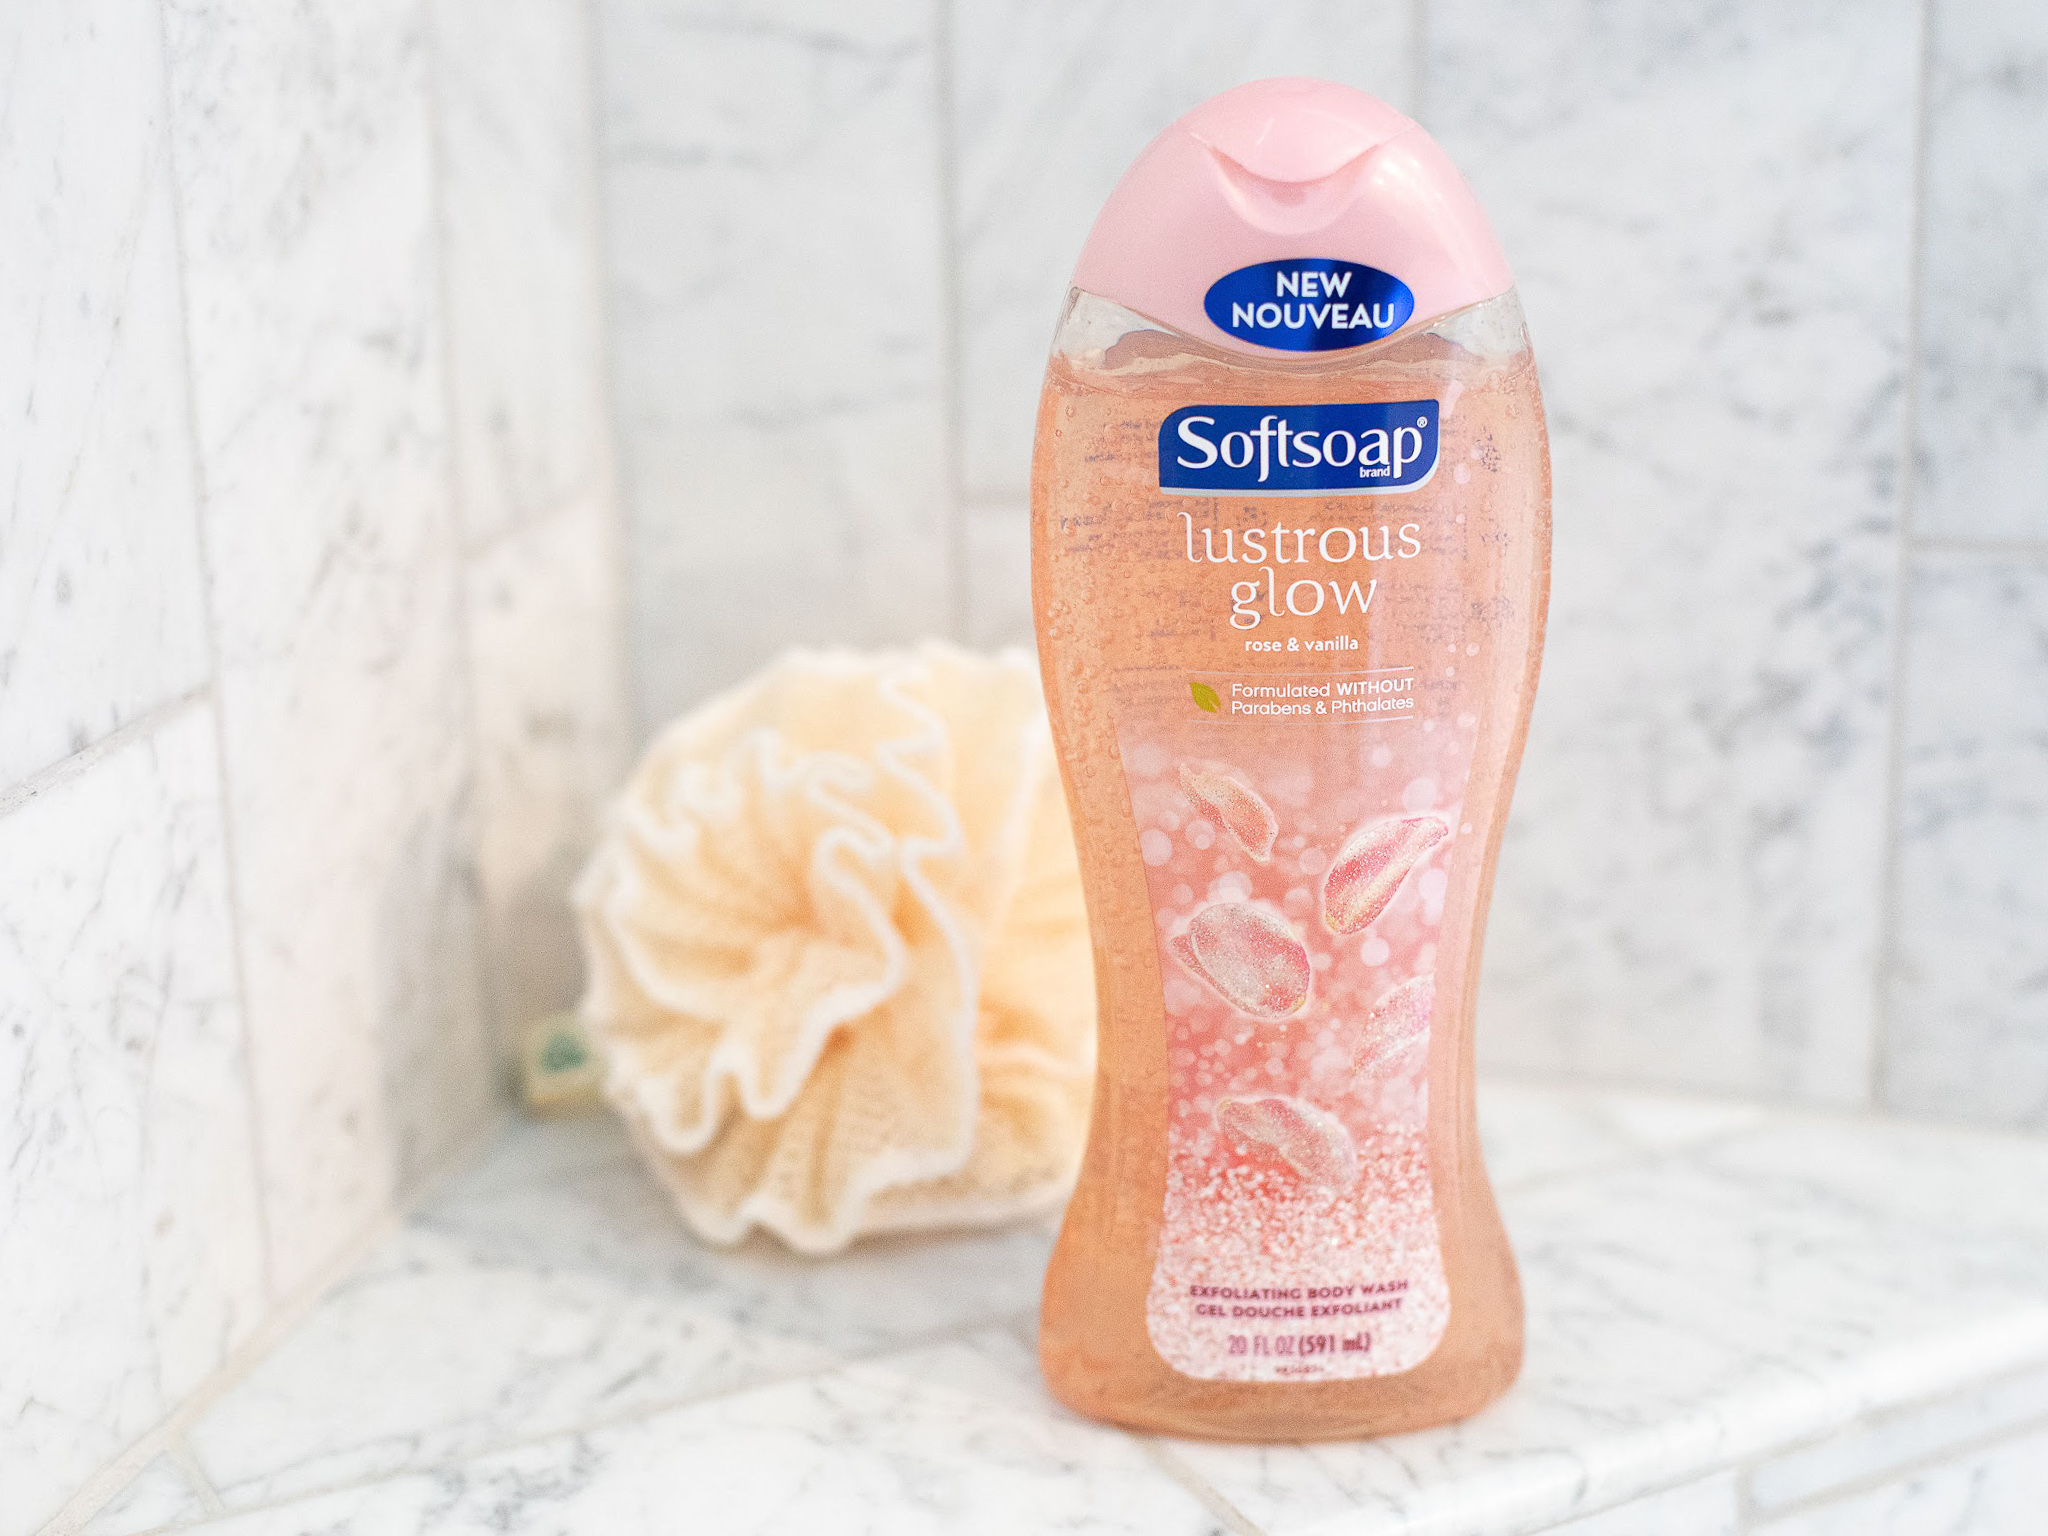 Softsoap Body Wash As Low As $2.99 At Kroger